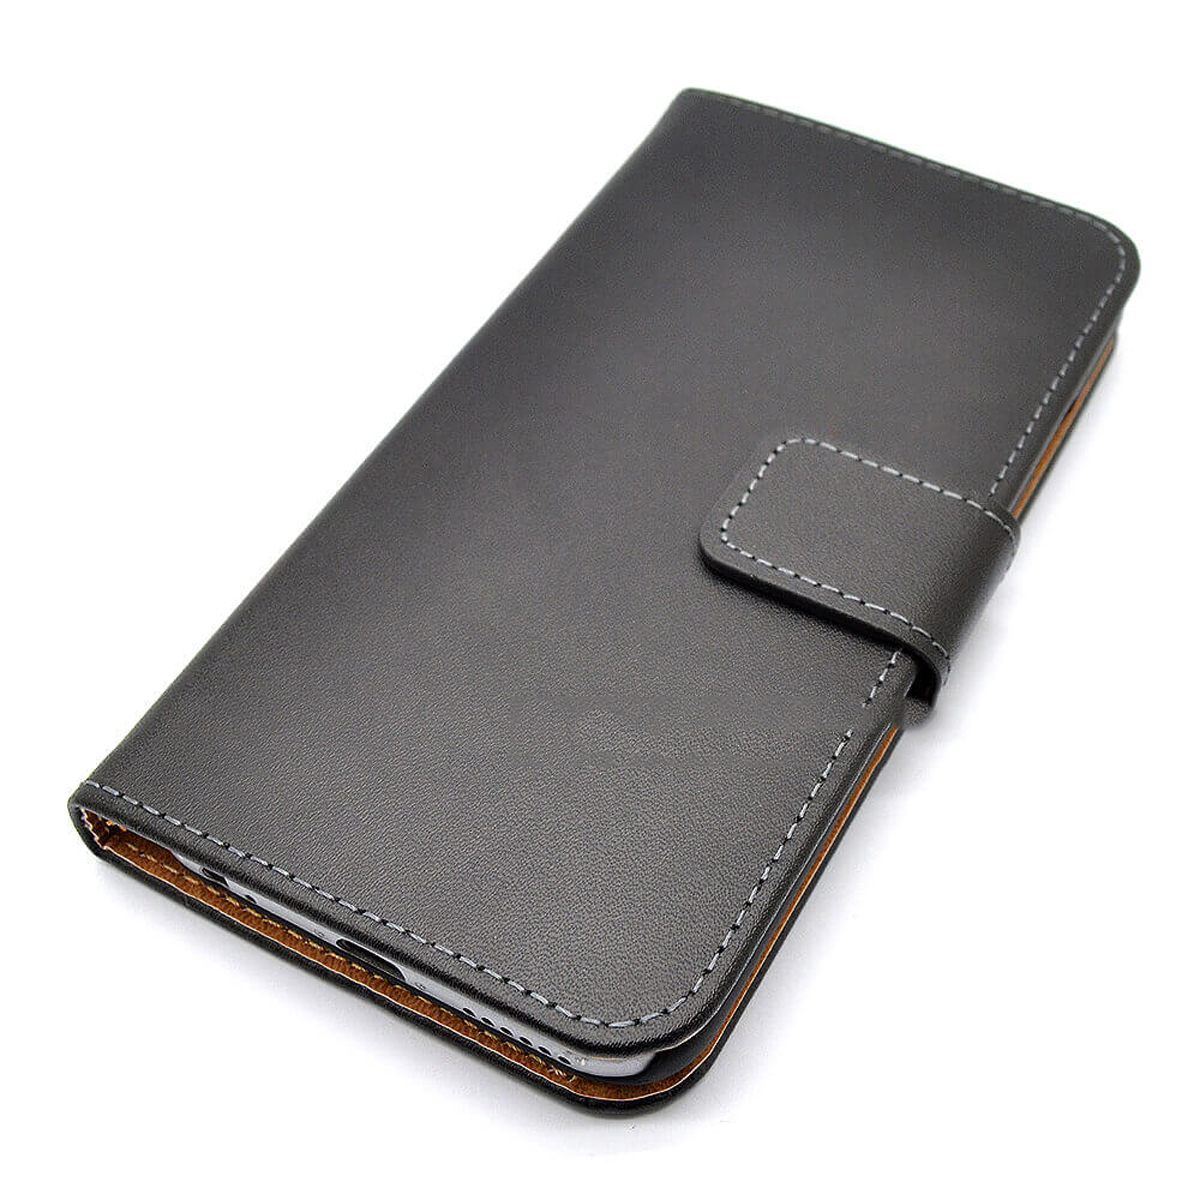 Genuine Leather Flip Wallet Case with Cash / Card Slots For Apple iPhone 7